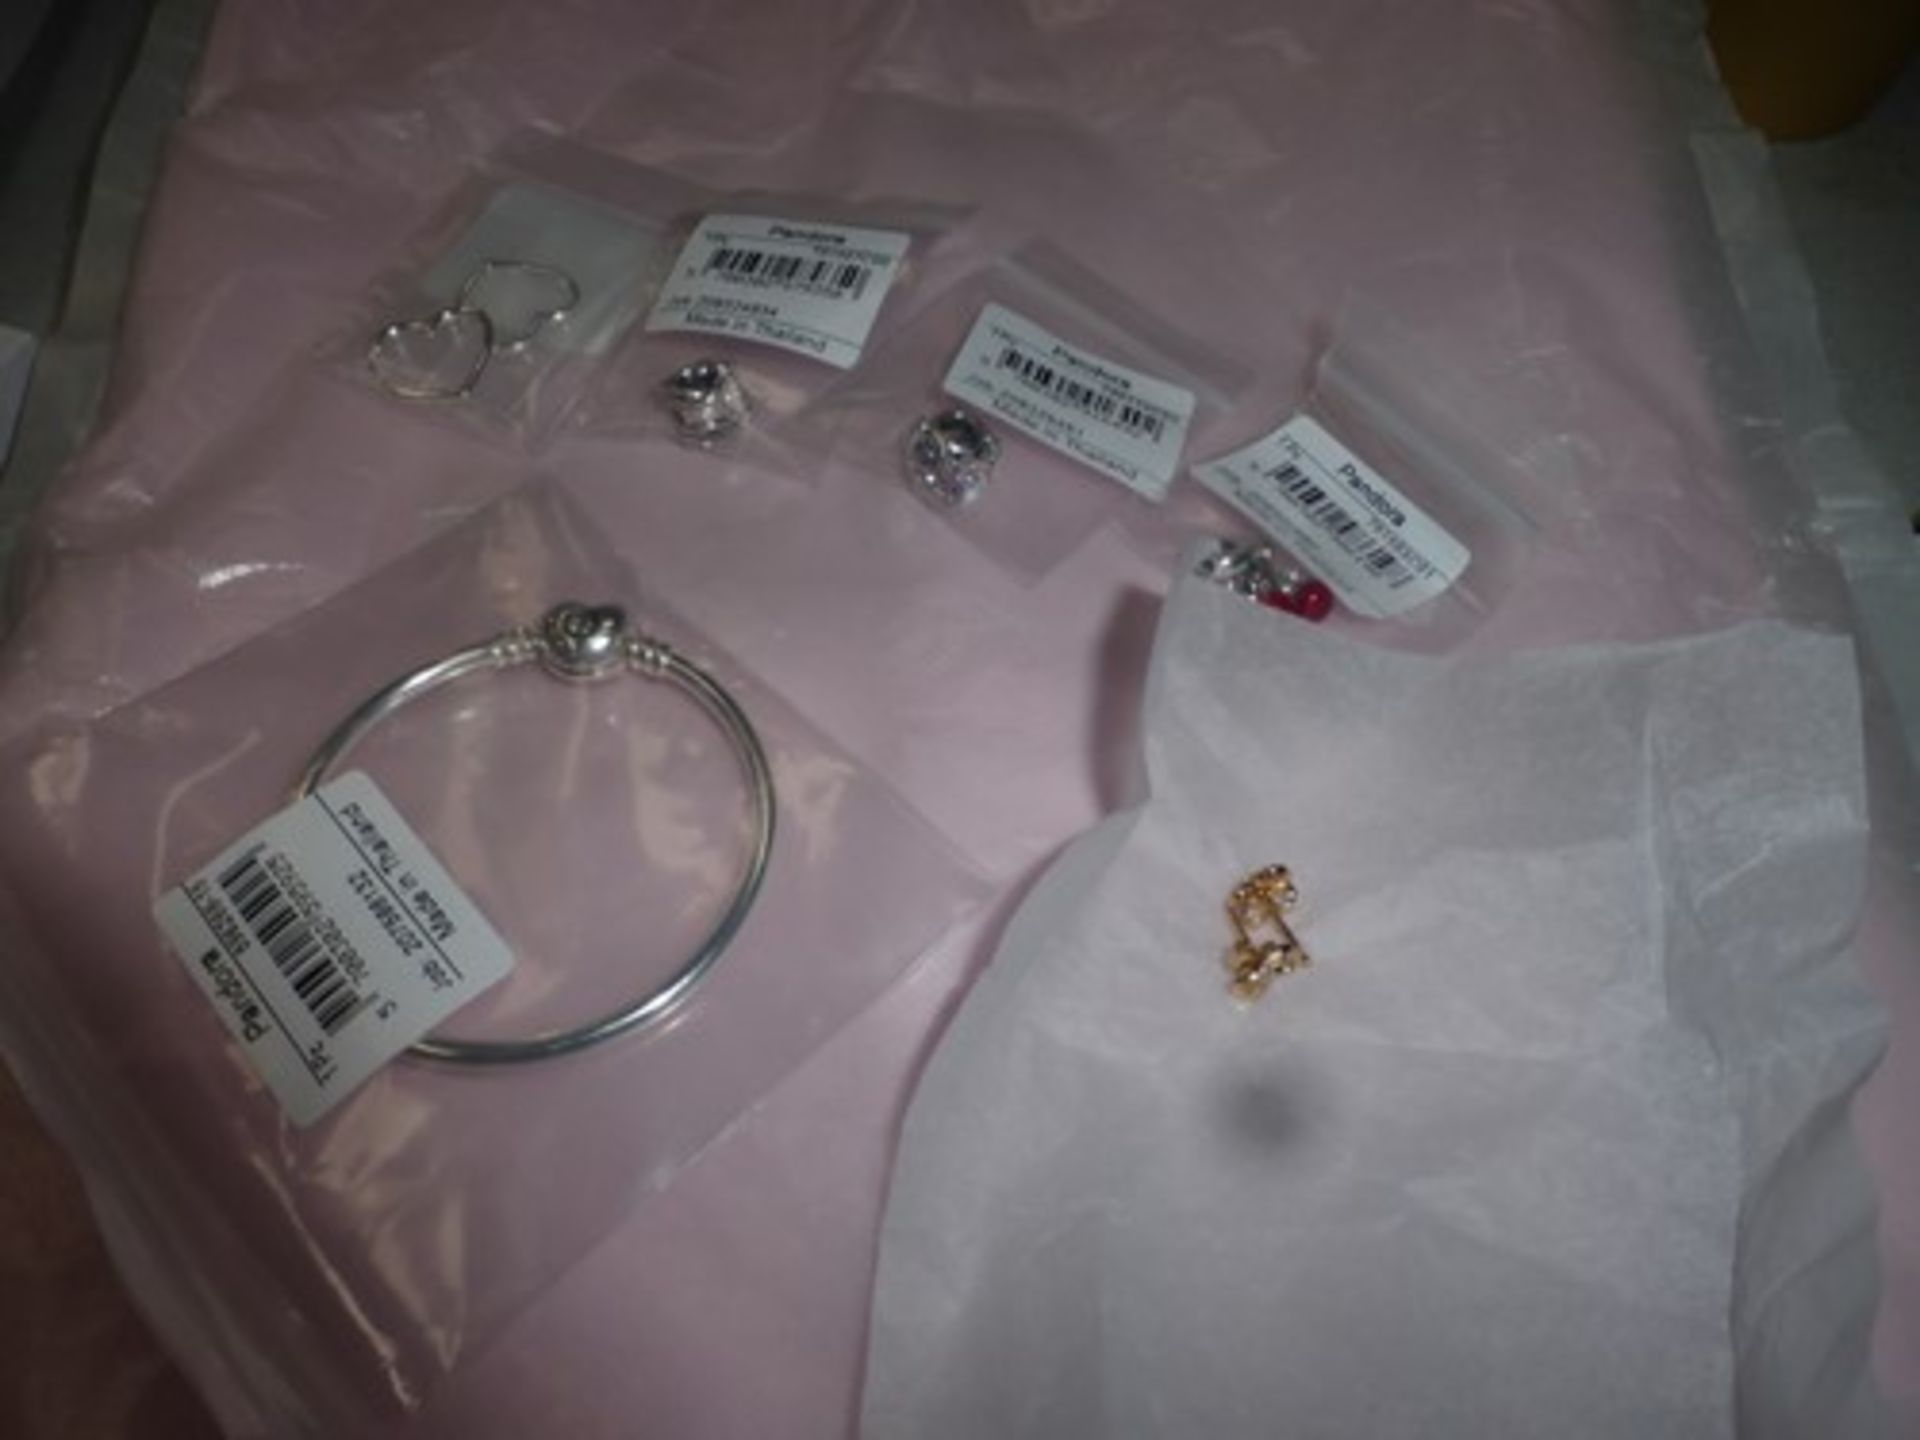 6 x items of Pandora jewellery, comprising of 1 x Moments heart clasp bangle, 3 x charms and 2 x